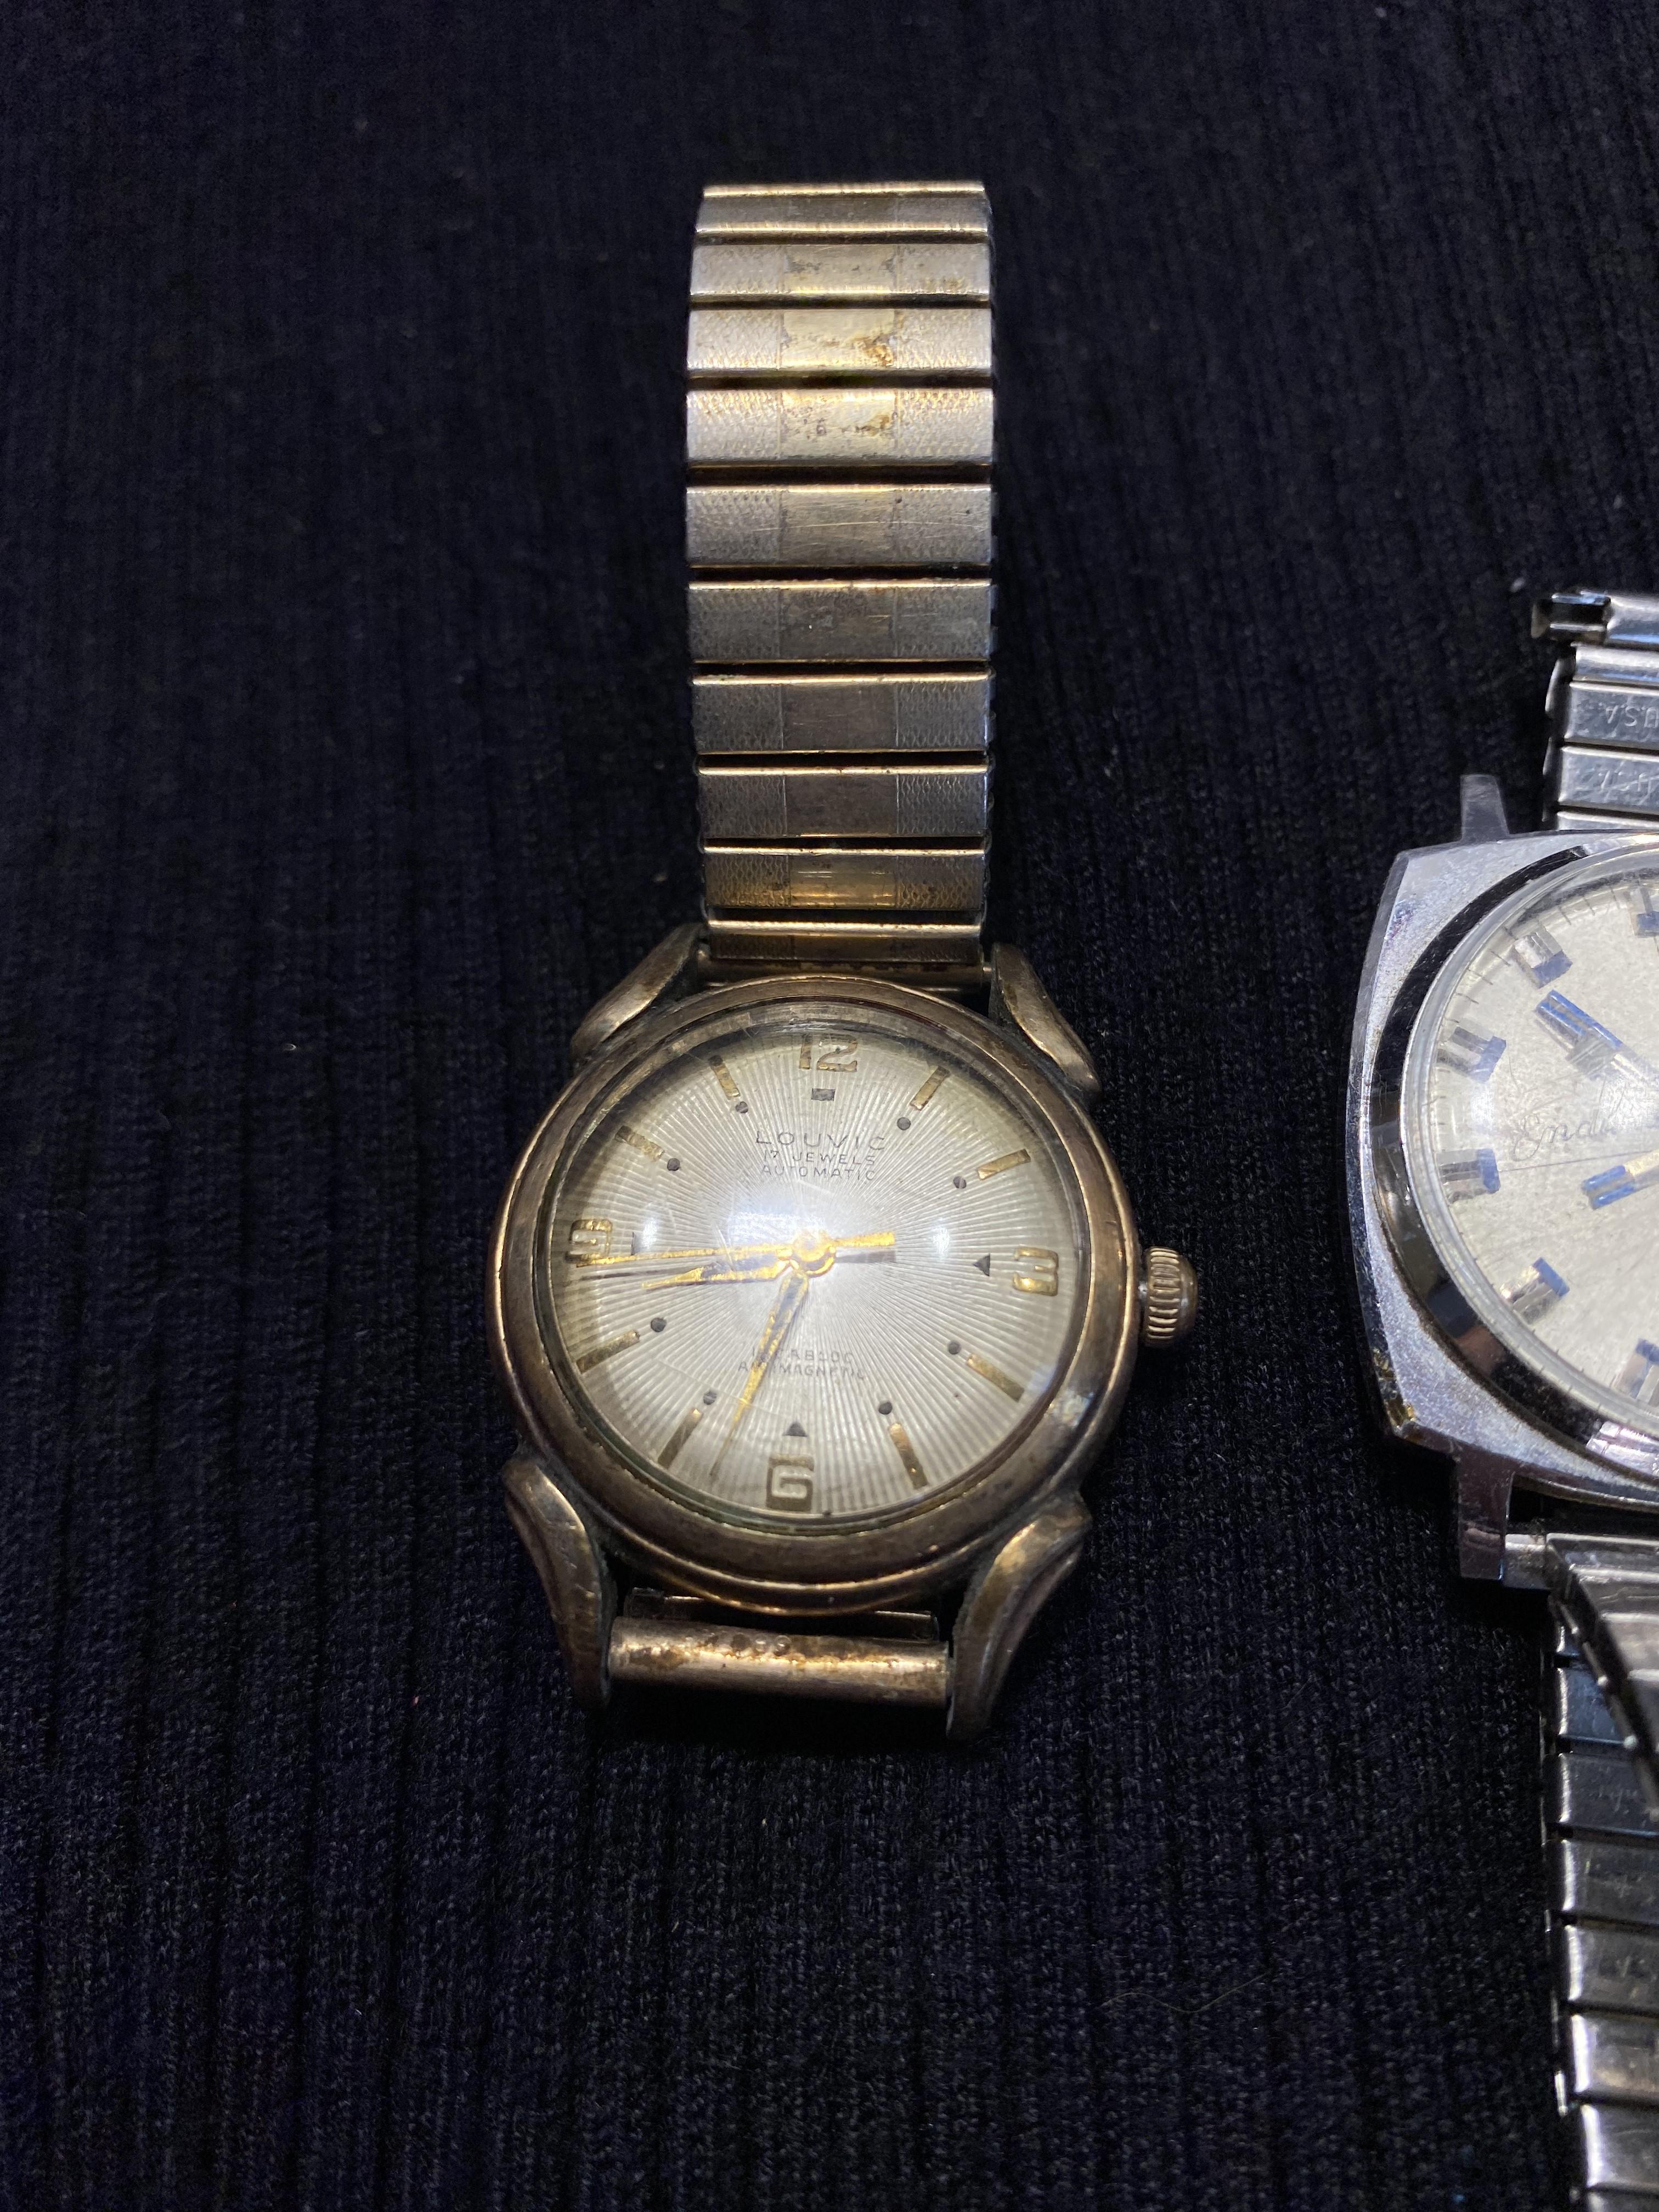 2 Vintage Watches including Endura and Louvic